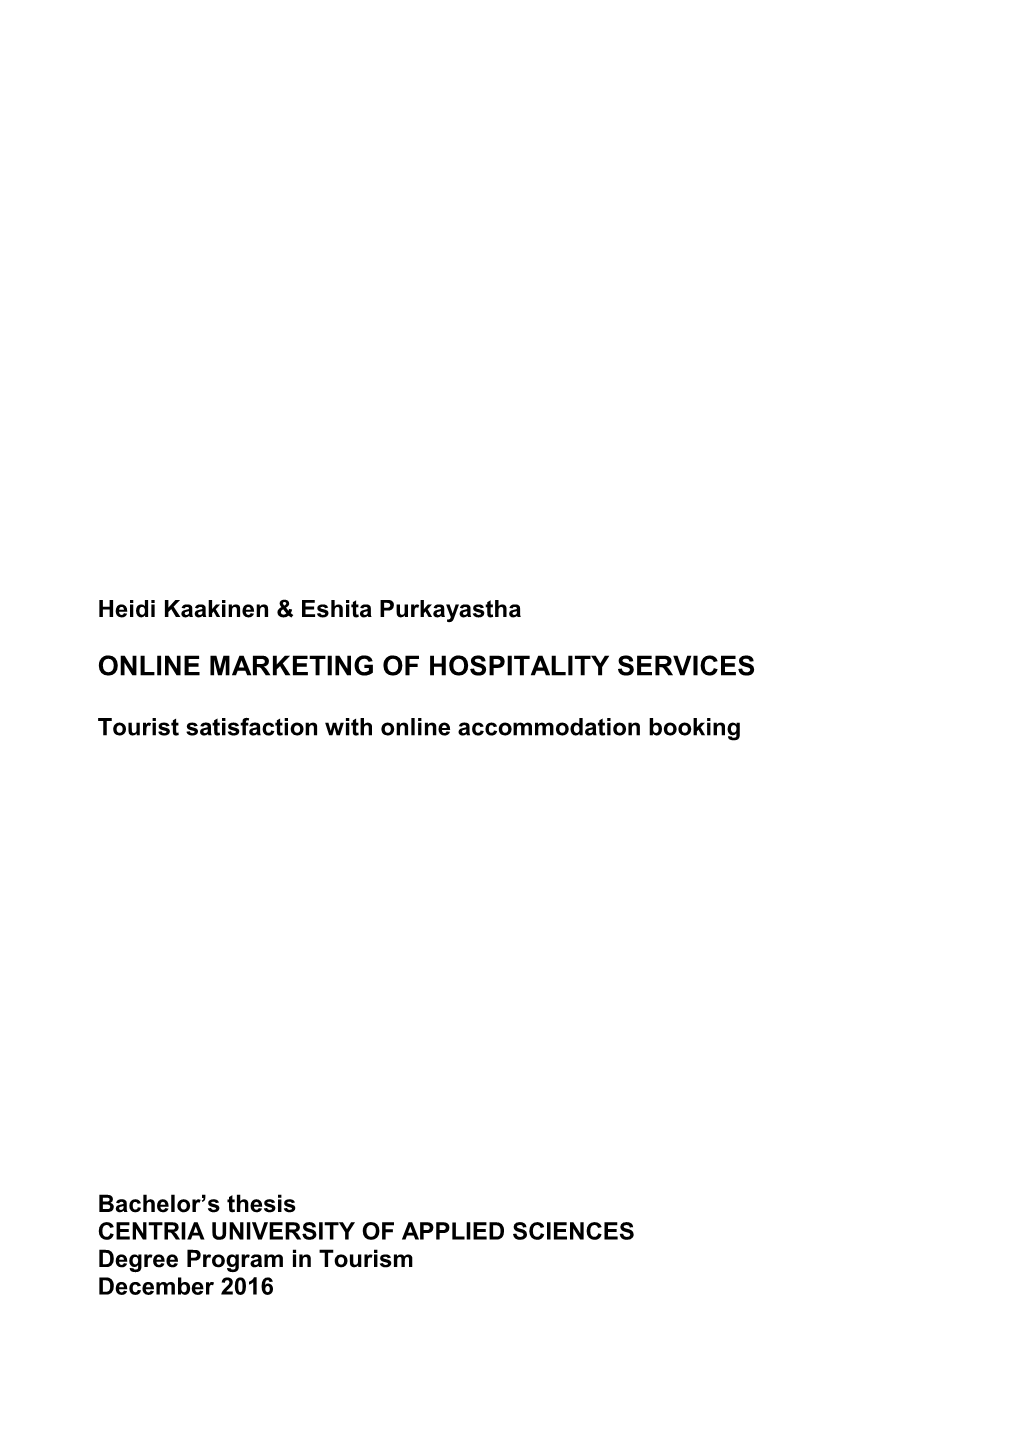 Online Marketing of Hospitality Services